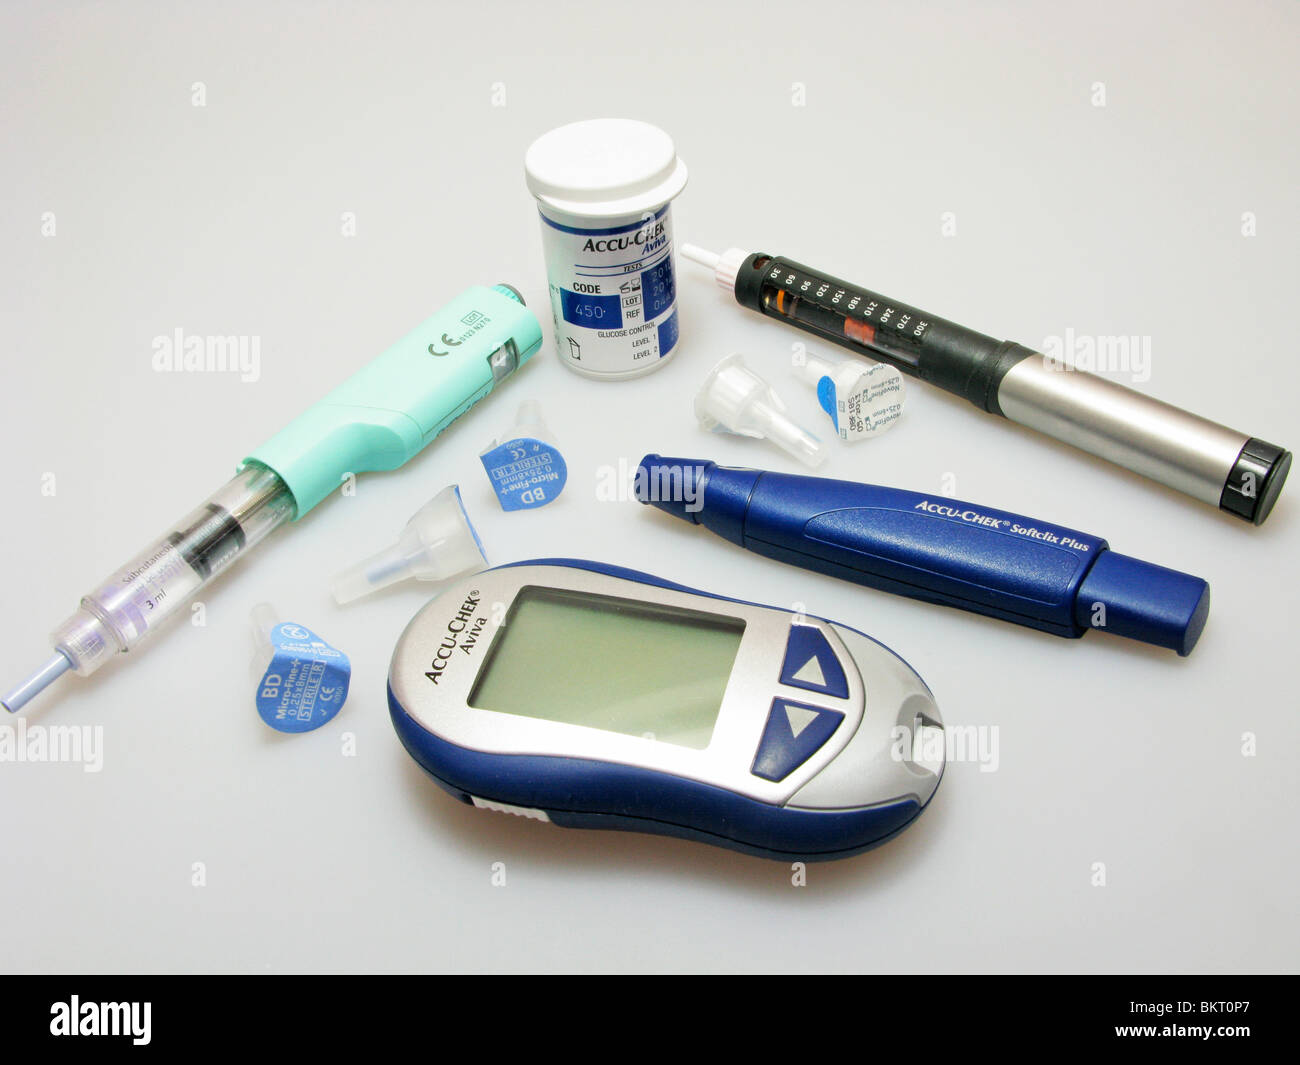 blood sugars (glucose) monitor & injection items needed for a someone suffering from diabetes Stock Photo